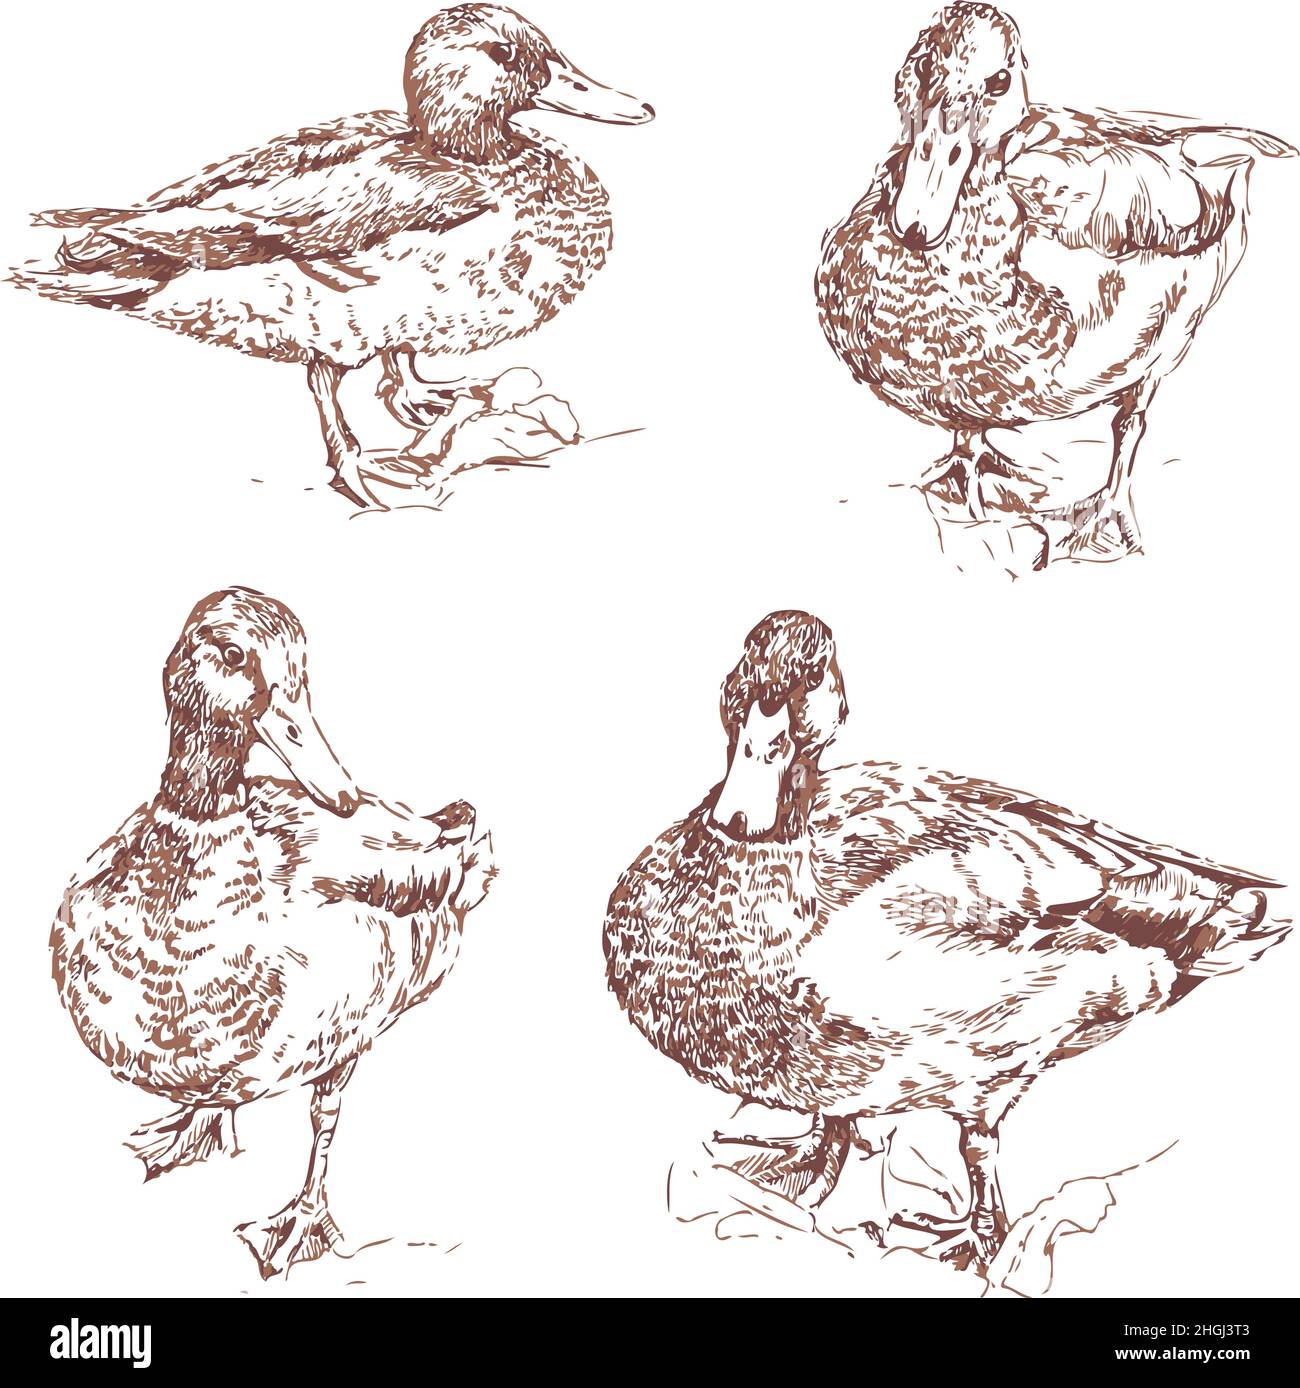 Vector illustration with collection of hand drawn ducks. Isolated wild ducks. Stock Vector